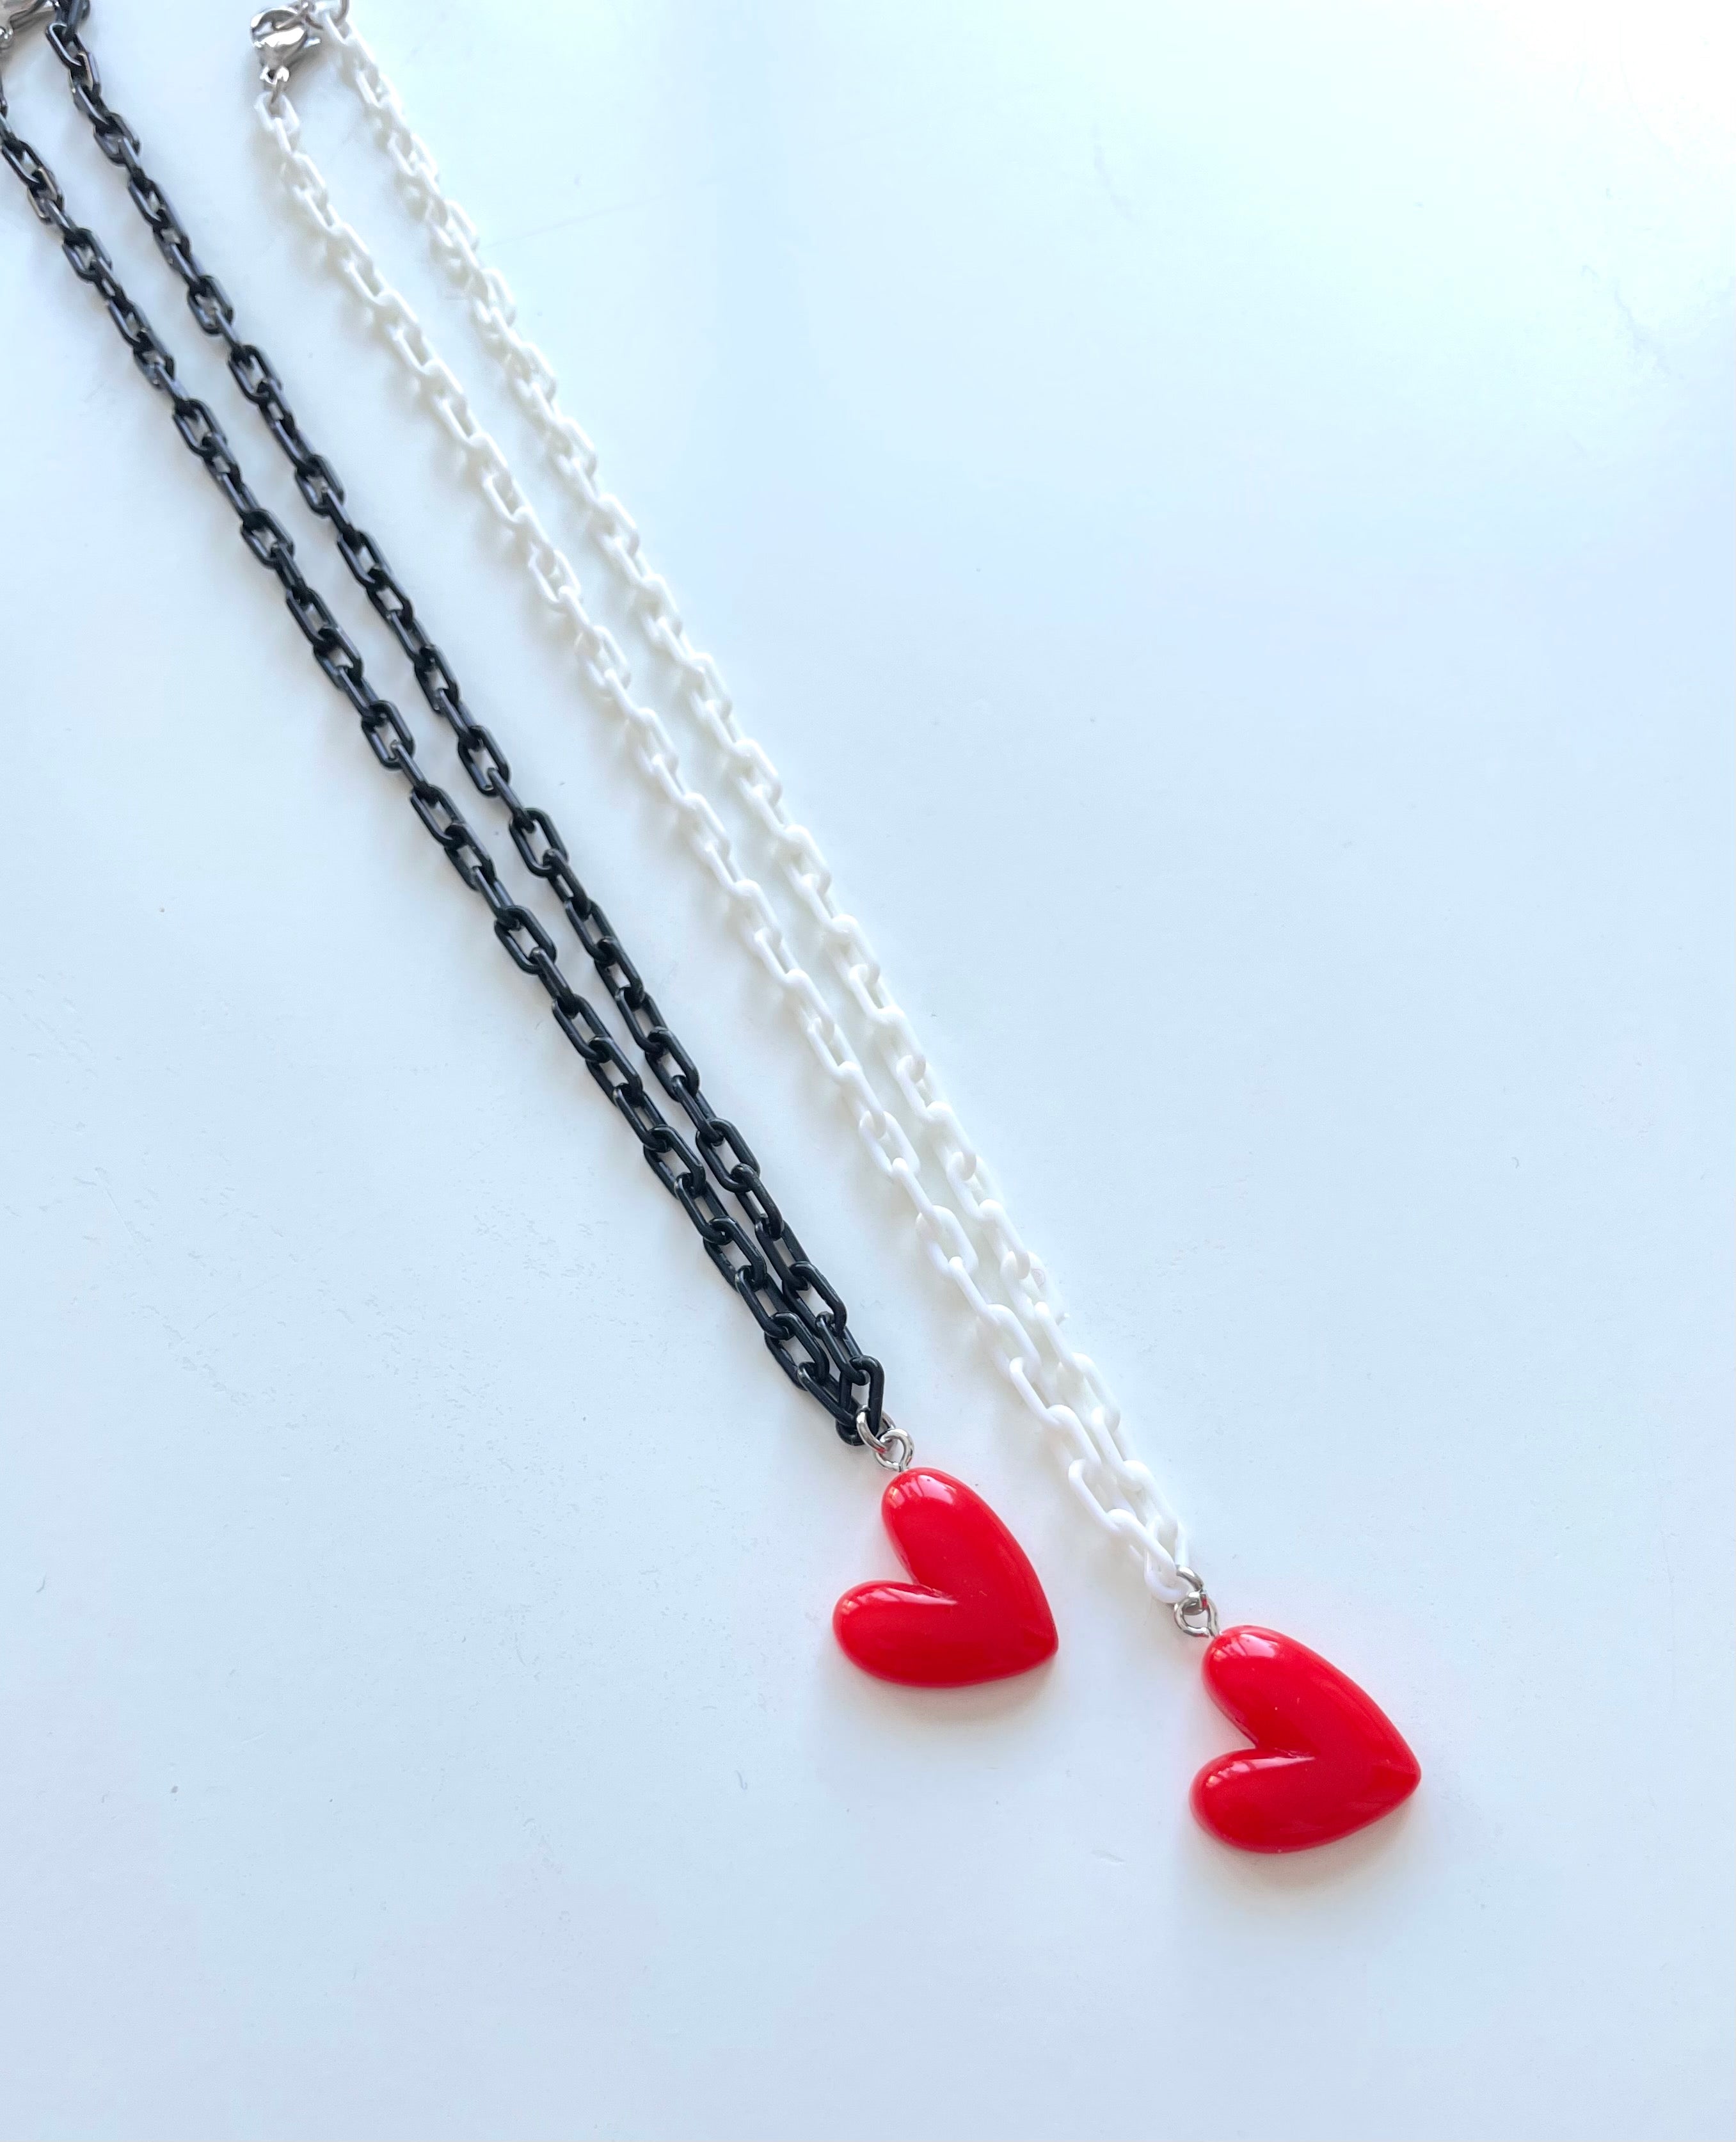 Red Heart Necklace on Chain